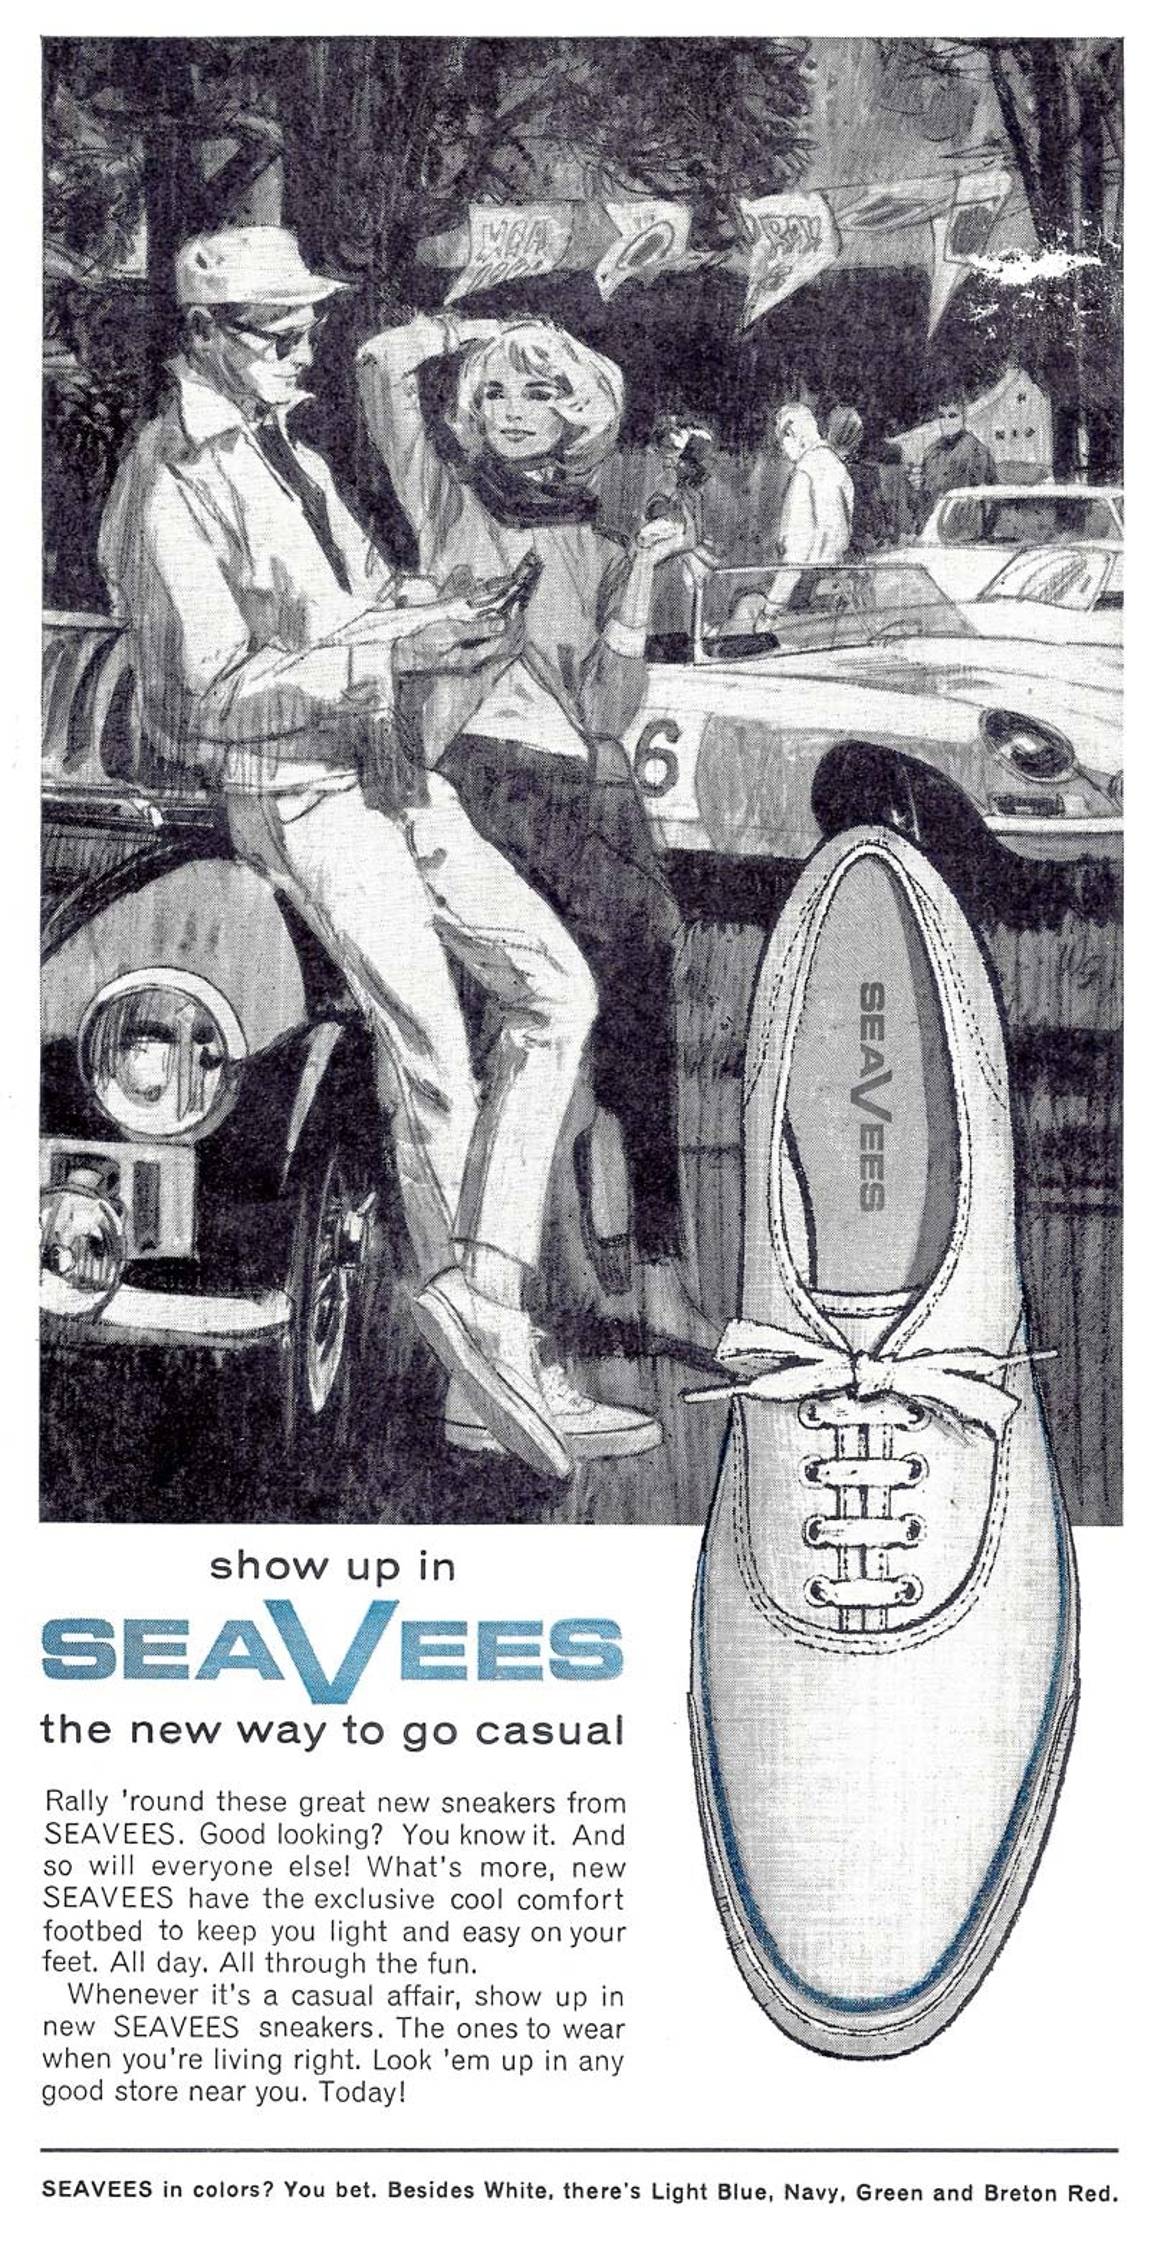 SeaVees: “The coolest brand story that you’ve never heard of!”